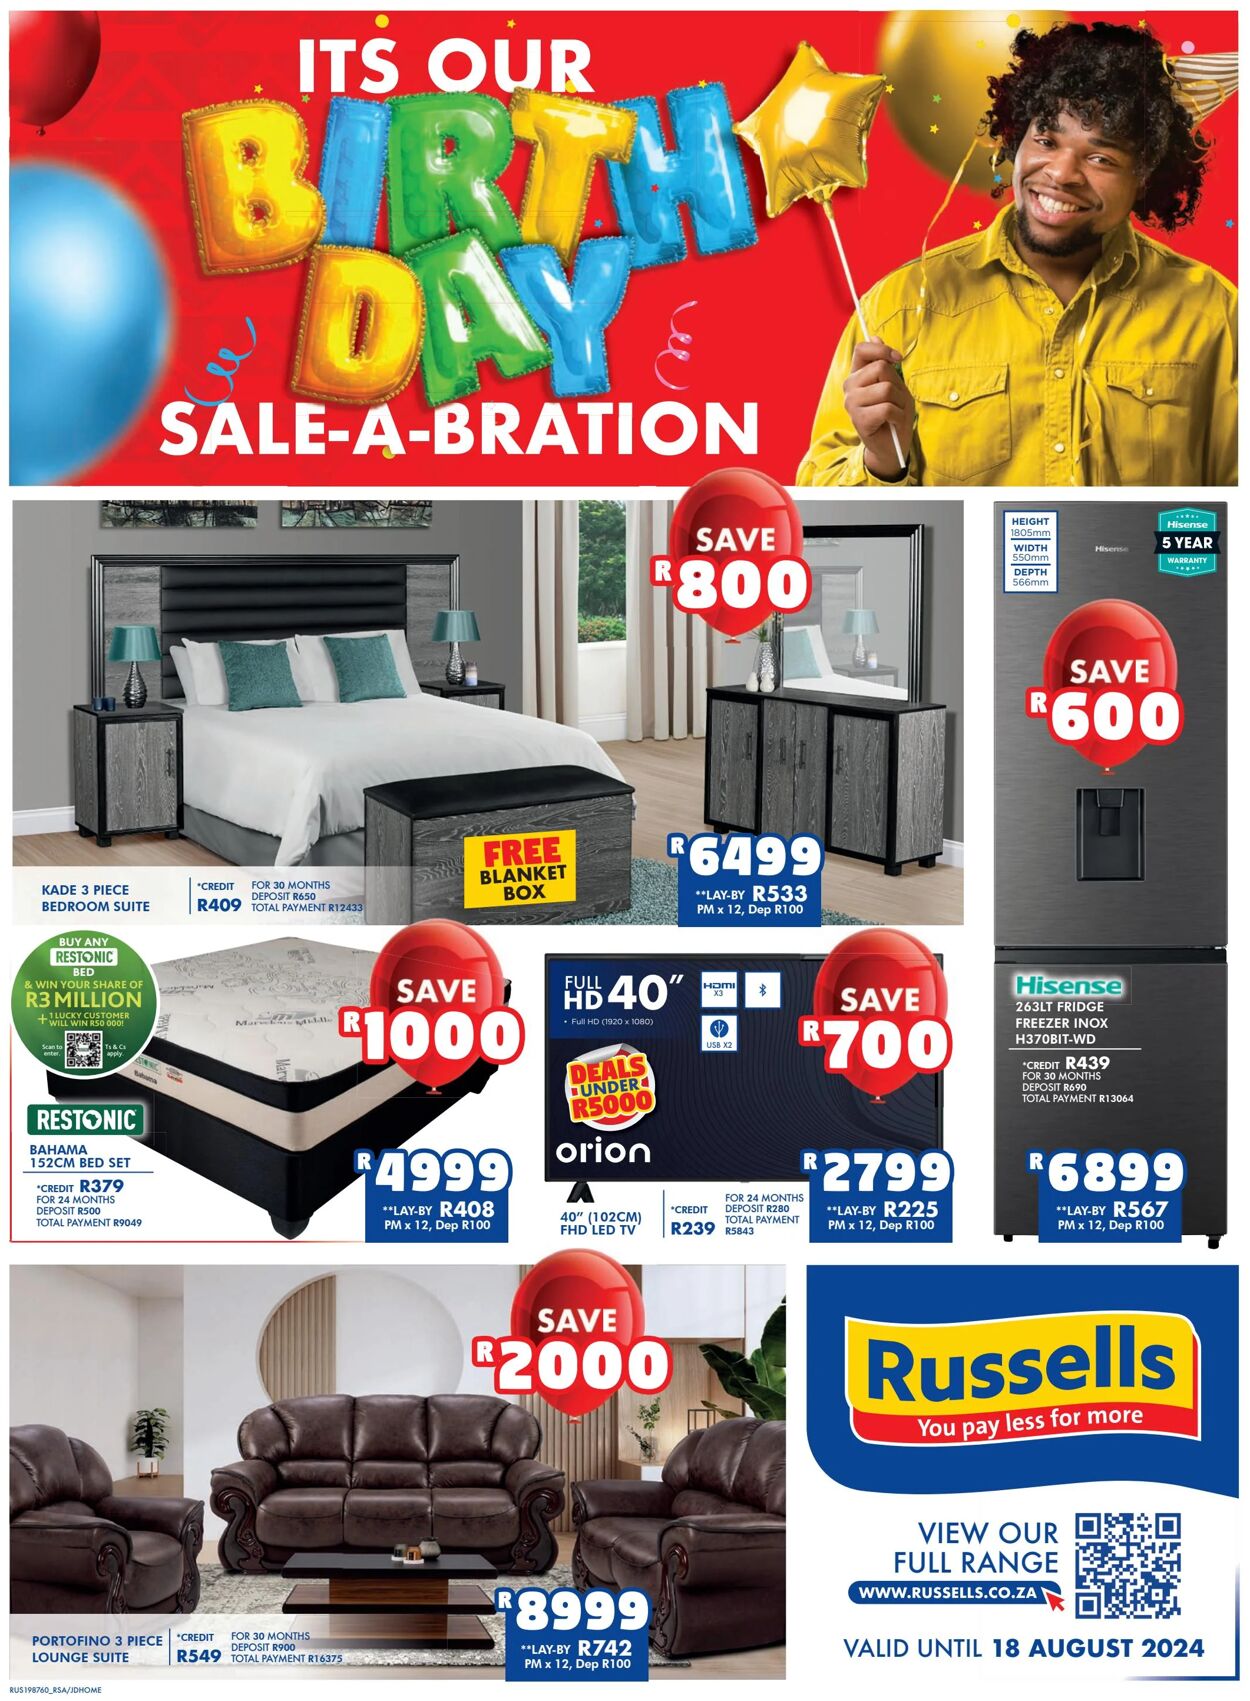 Russells Promotional specials